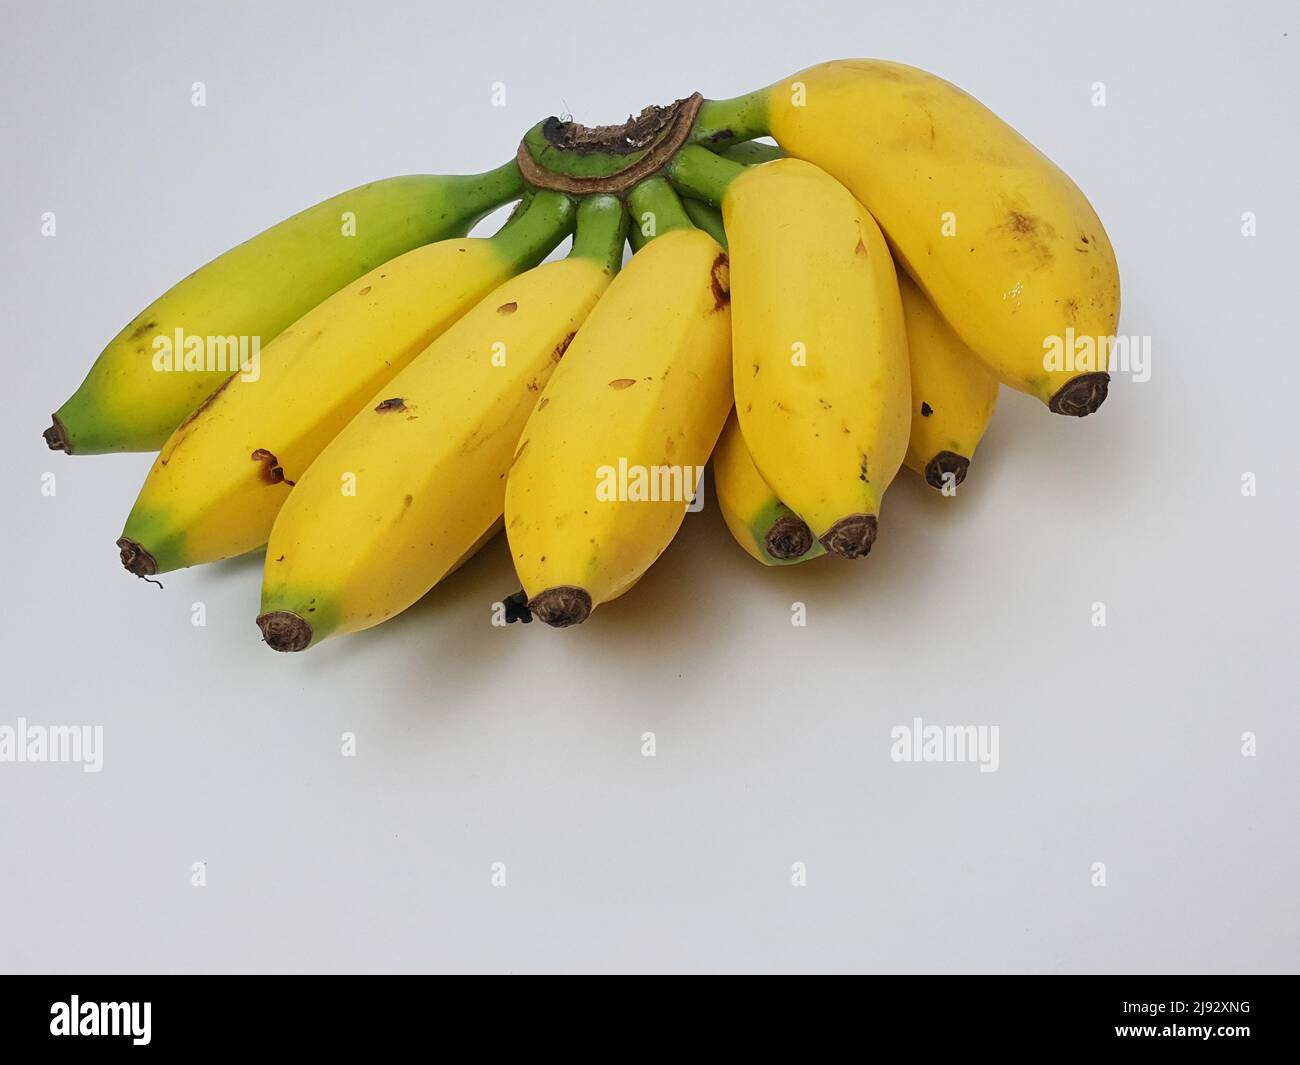 Yellow ripe banana which has many vitamins good for health is on a white background Stock Photo